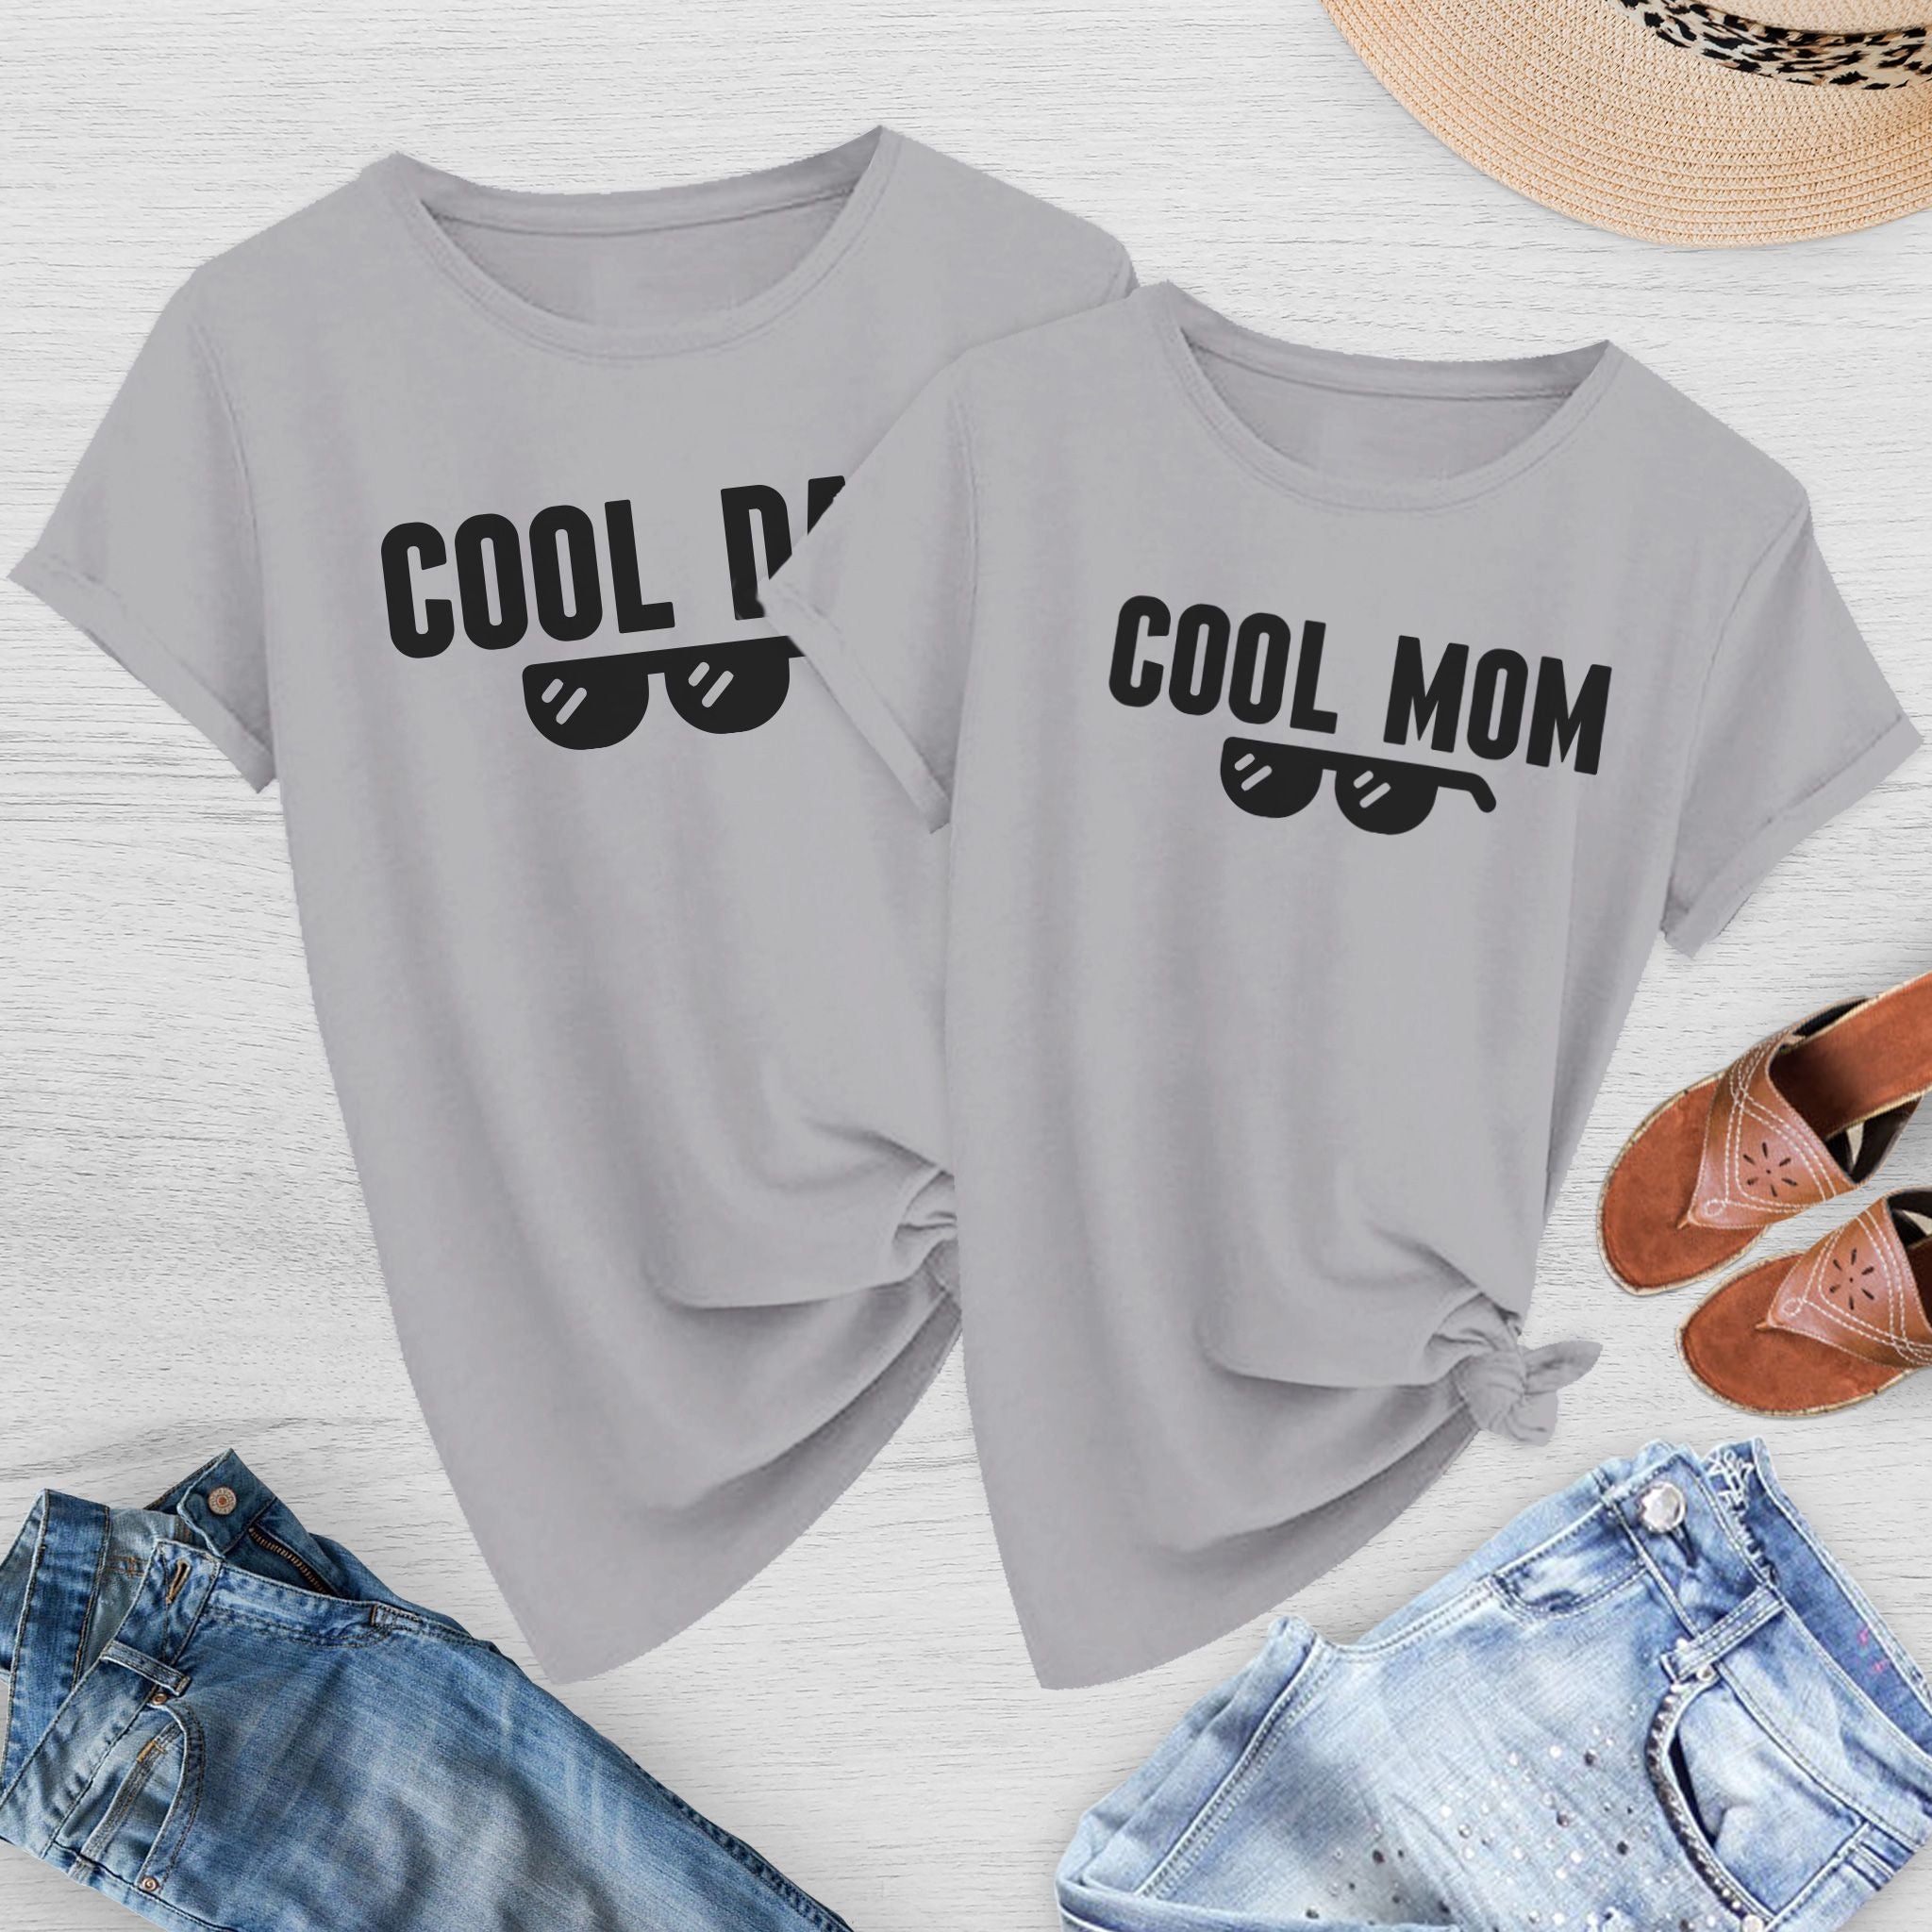 New Parents - Cool Dad & Cool Mom